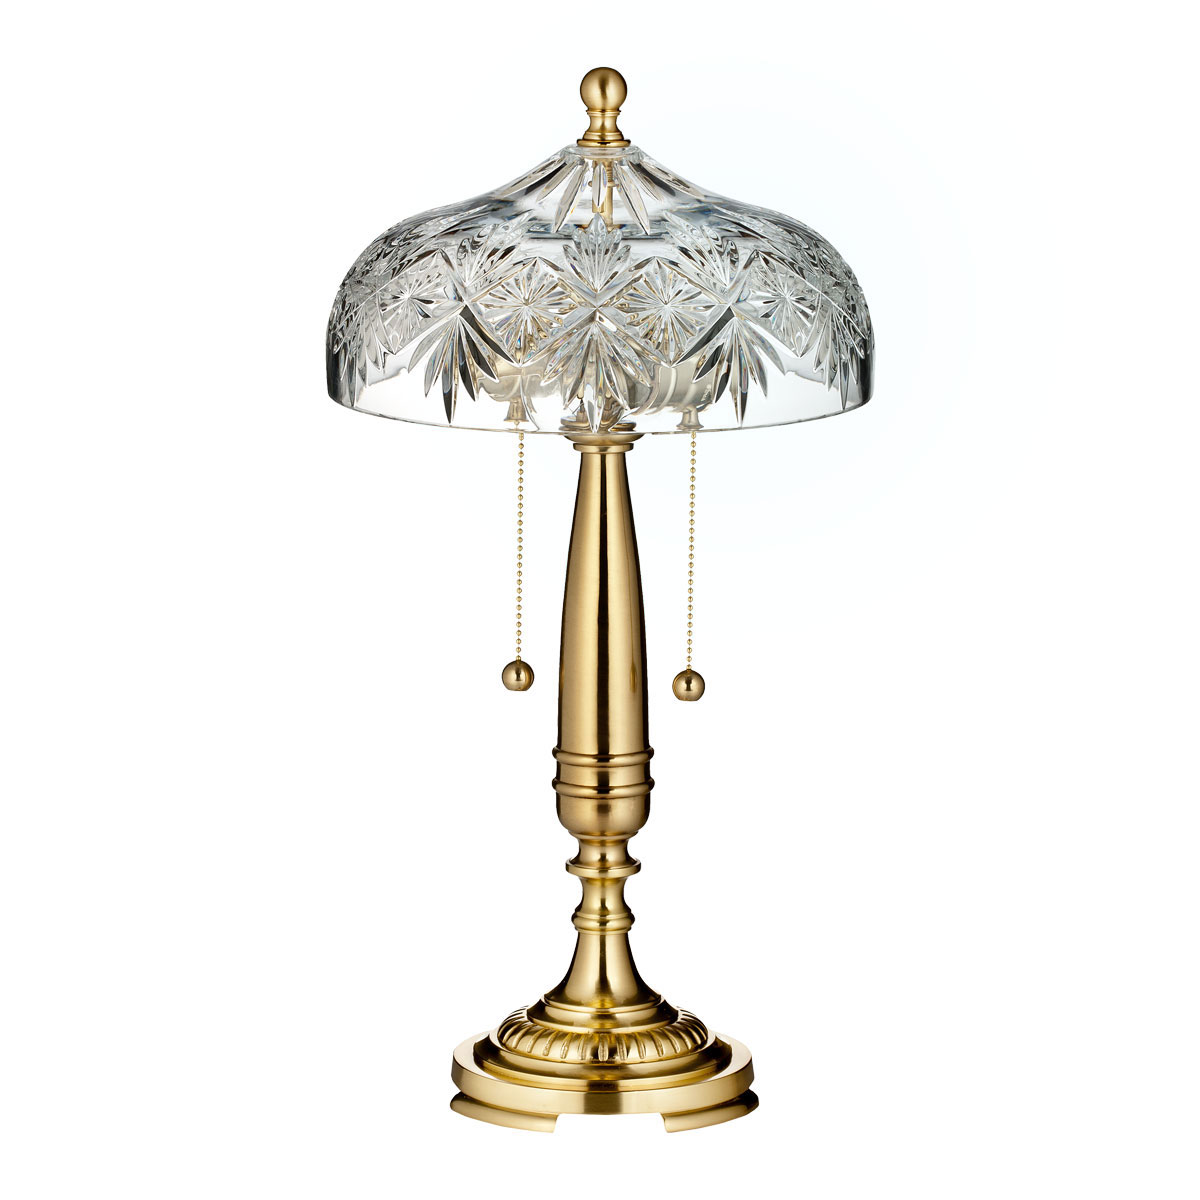 Waterford Renmore 19" Accent Crystal Lamp